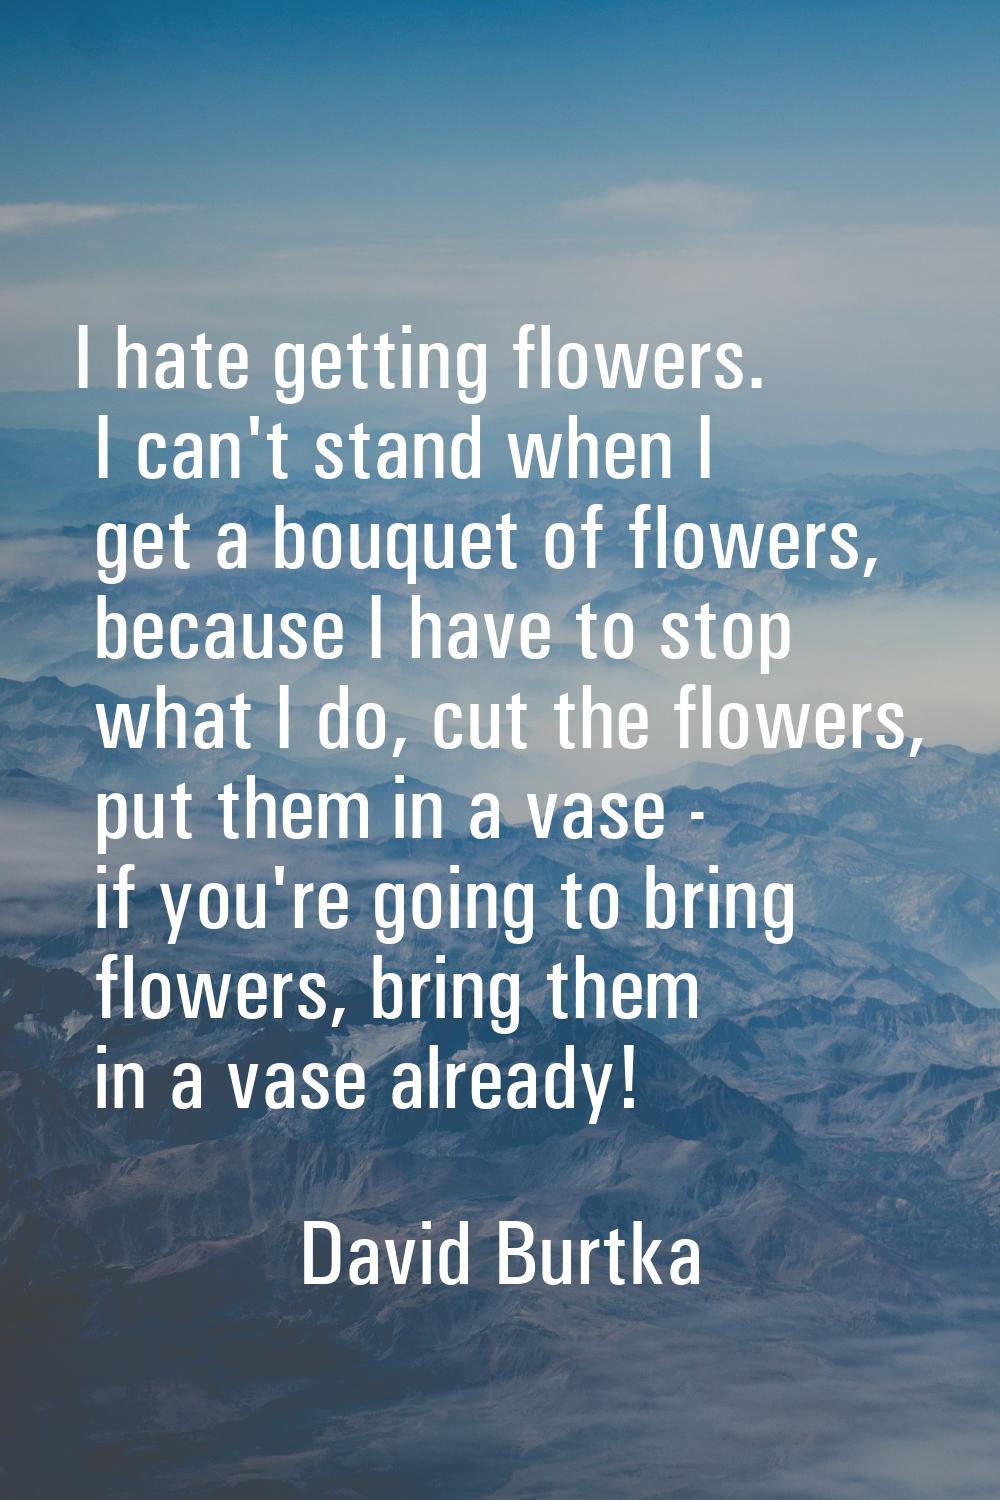 I hate getting flowers. I can't stand when I get a bouquet of flowers, because I have to stop what 